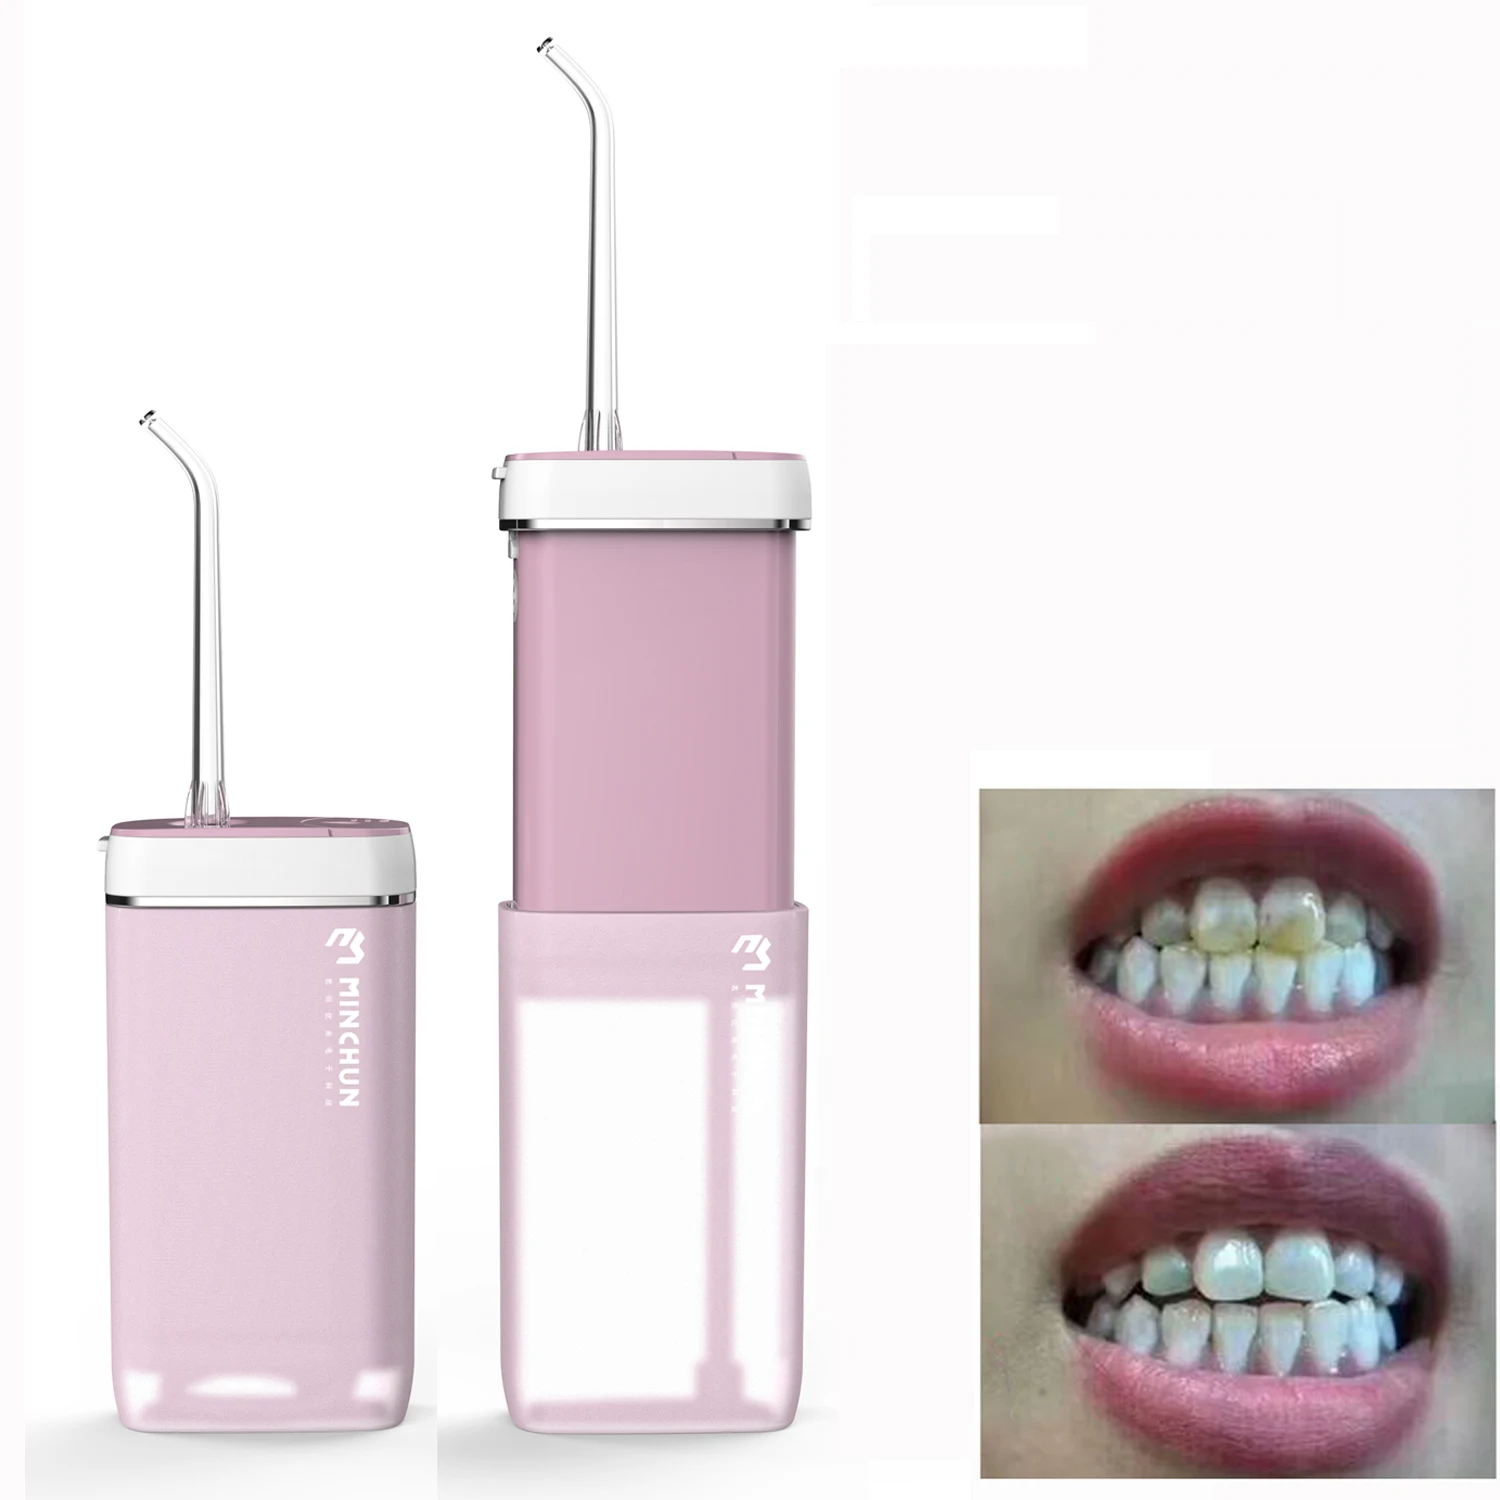 

2021 h2oflos Water Flosser Dental Oral Irrigator Teeth Water Cleaner Pick Spa Tooth Care Clean With For Family chinese factories, White/pink/blue